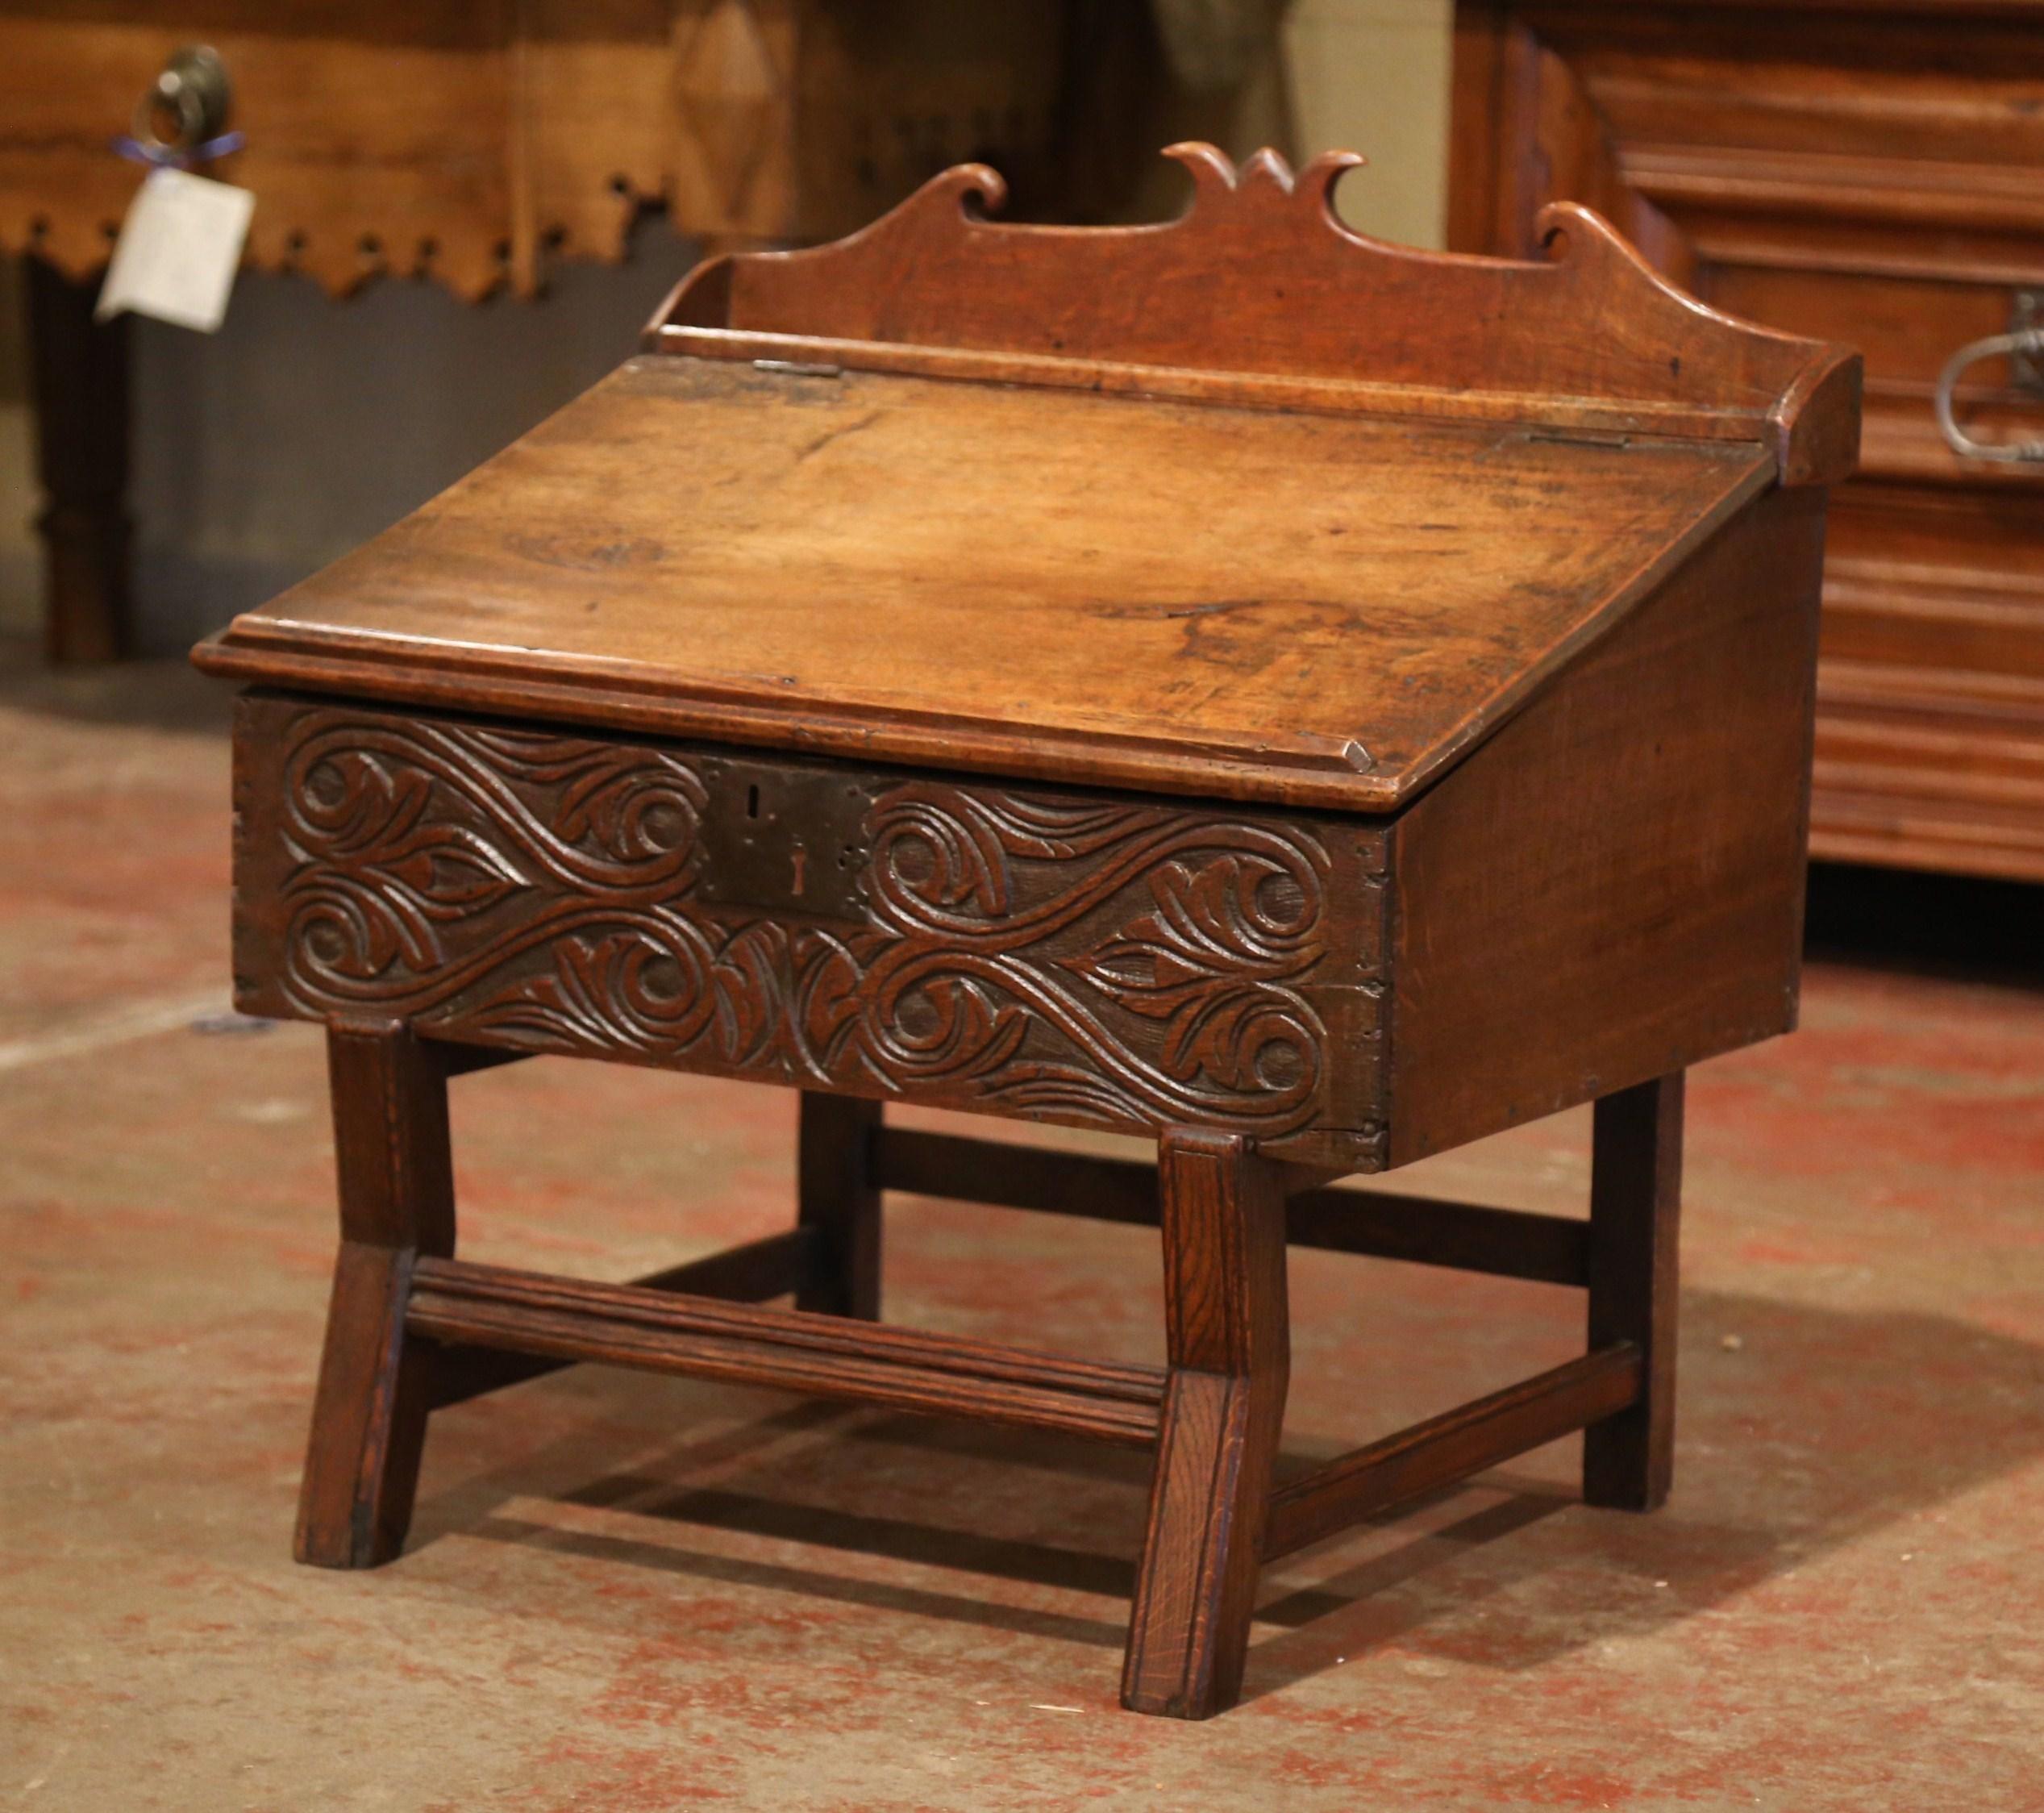 18th Century French Carved Walnut Desk on Legs with Slant Top and Inside Storage In Excellent Condition For Sale In Dallas, TX